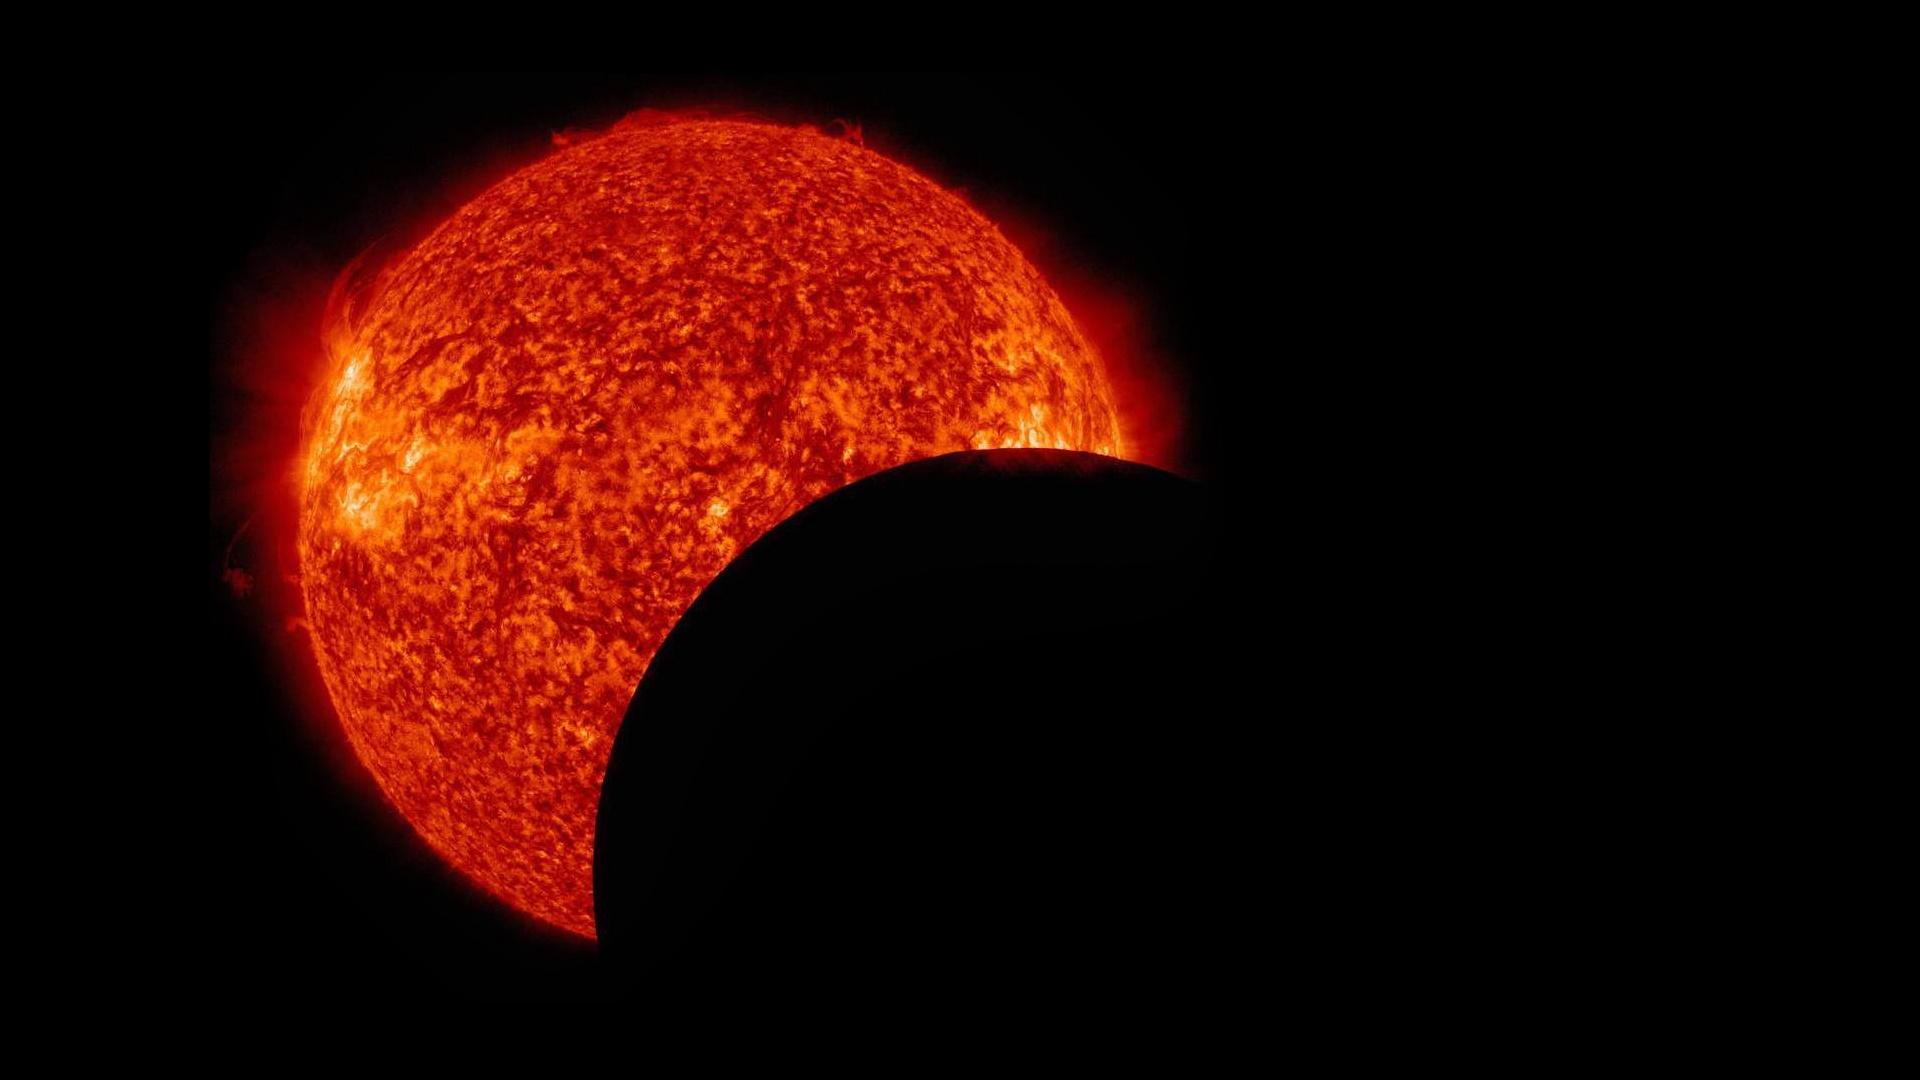 A dark circle (the moon) moves in front of the sun during an eclipse